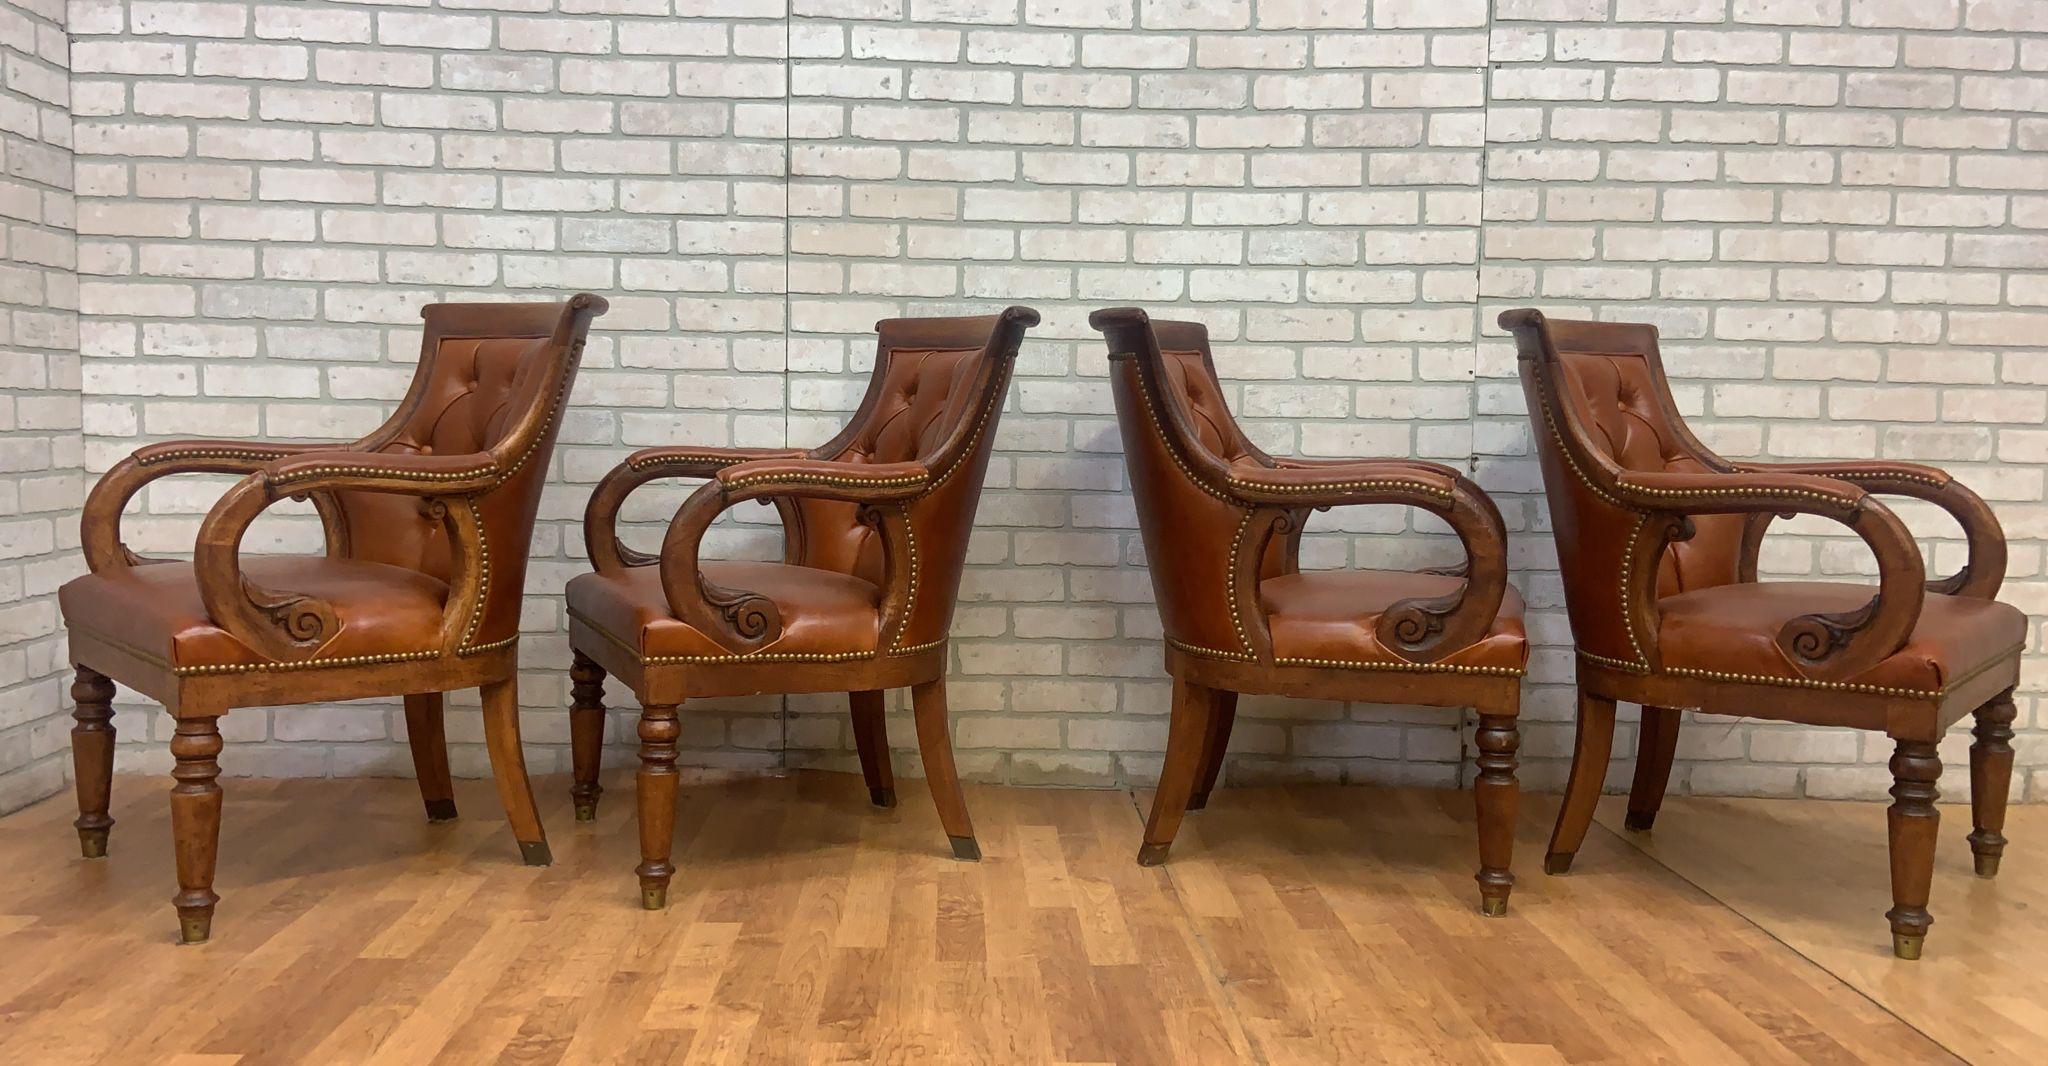 Vintage Hancock and Moore Tufted Jockey Club Chair Newly Upholstered in Leather - Set of 4

Beautiful set of vintage Hancock & Moore Jockey Chairs with intricate scrolled arms, turned legs, arched backs and brand new high end leather upholstery and